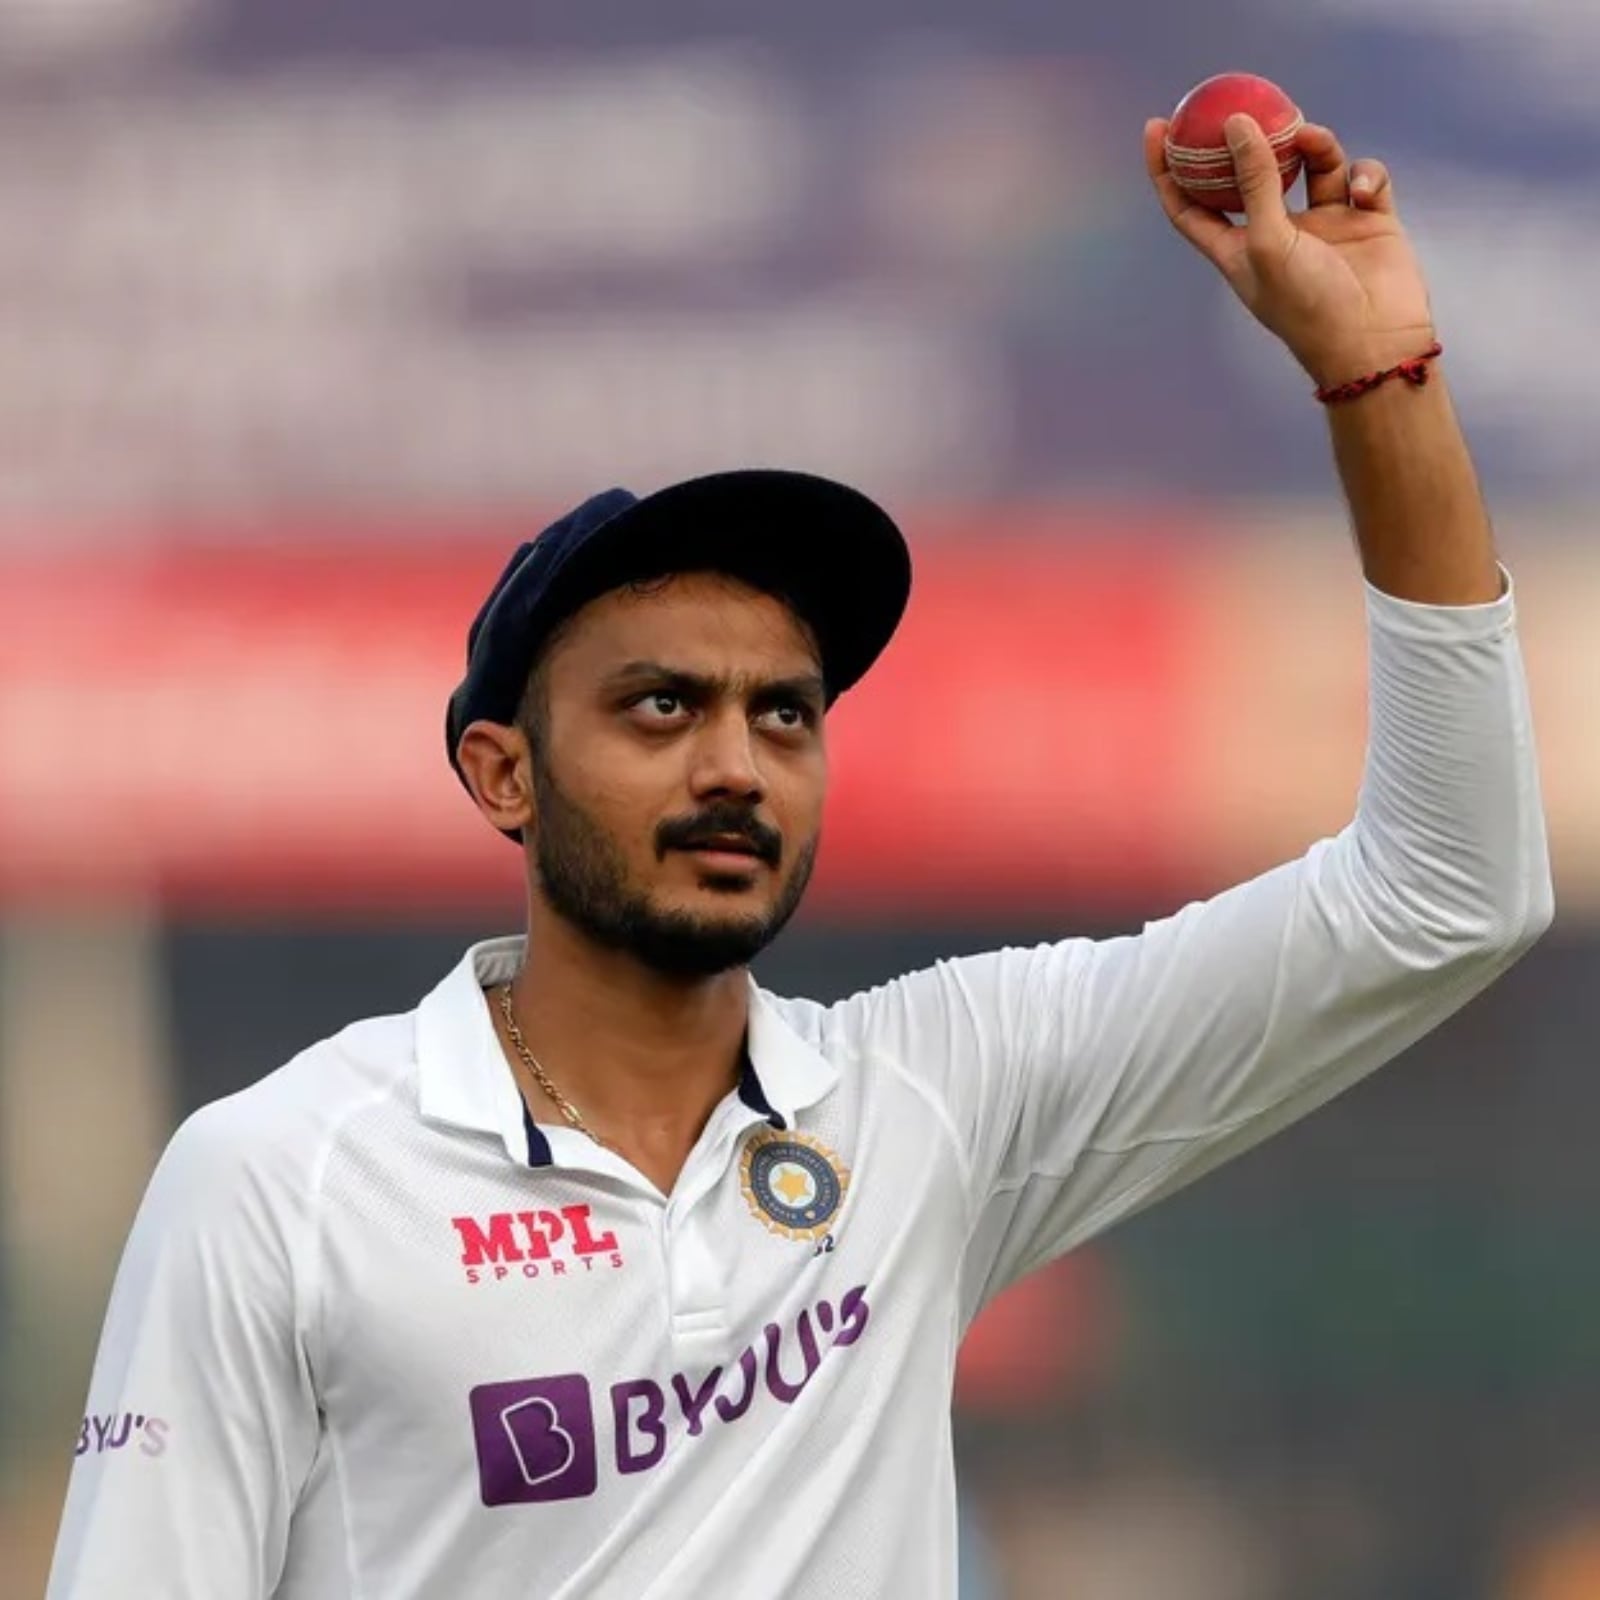 IND Vs SL 2022: Axar Patel Replaces Kuldeep Yadav For Pink Ball Test In Bengaluru